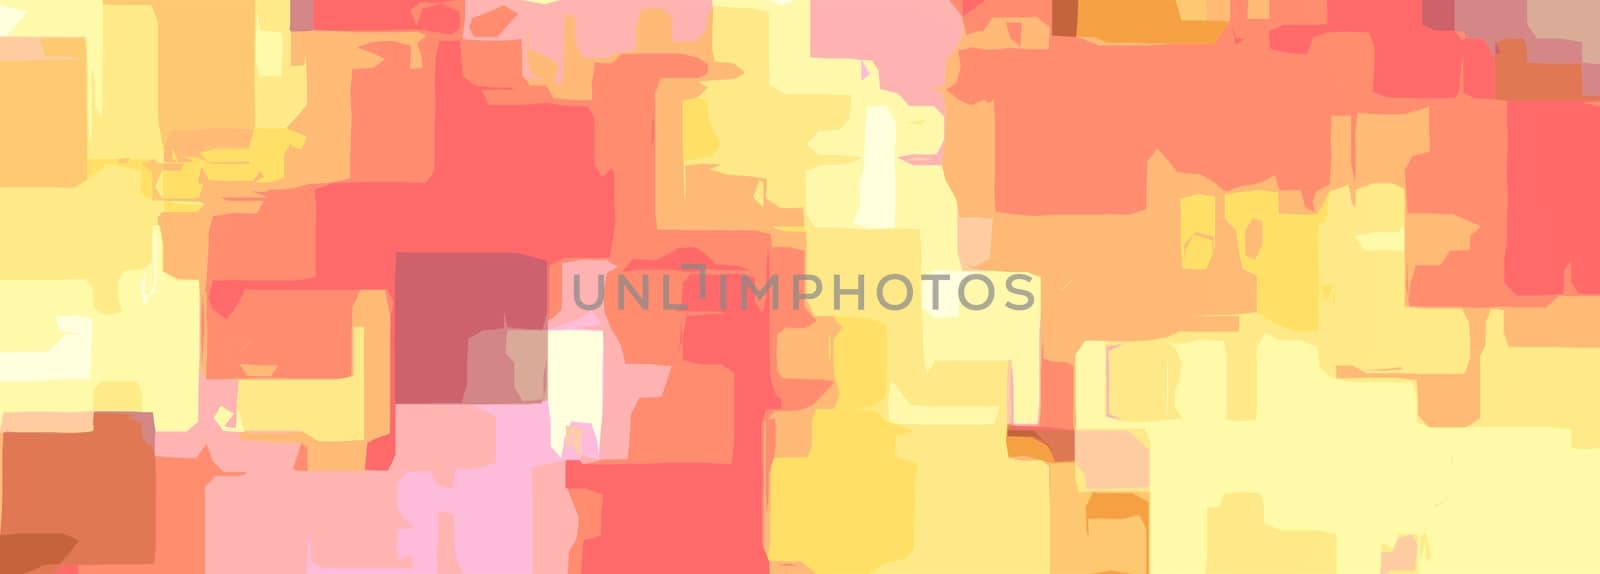 pink yellow and red painting abstract background